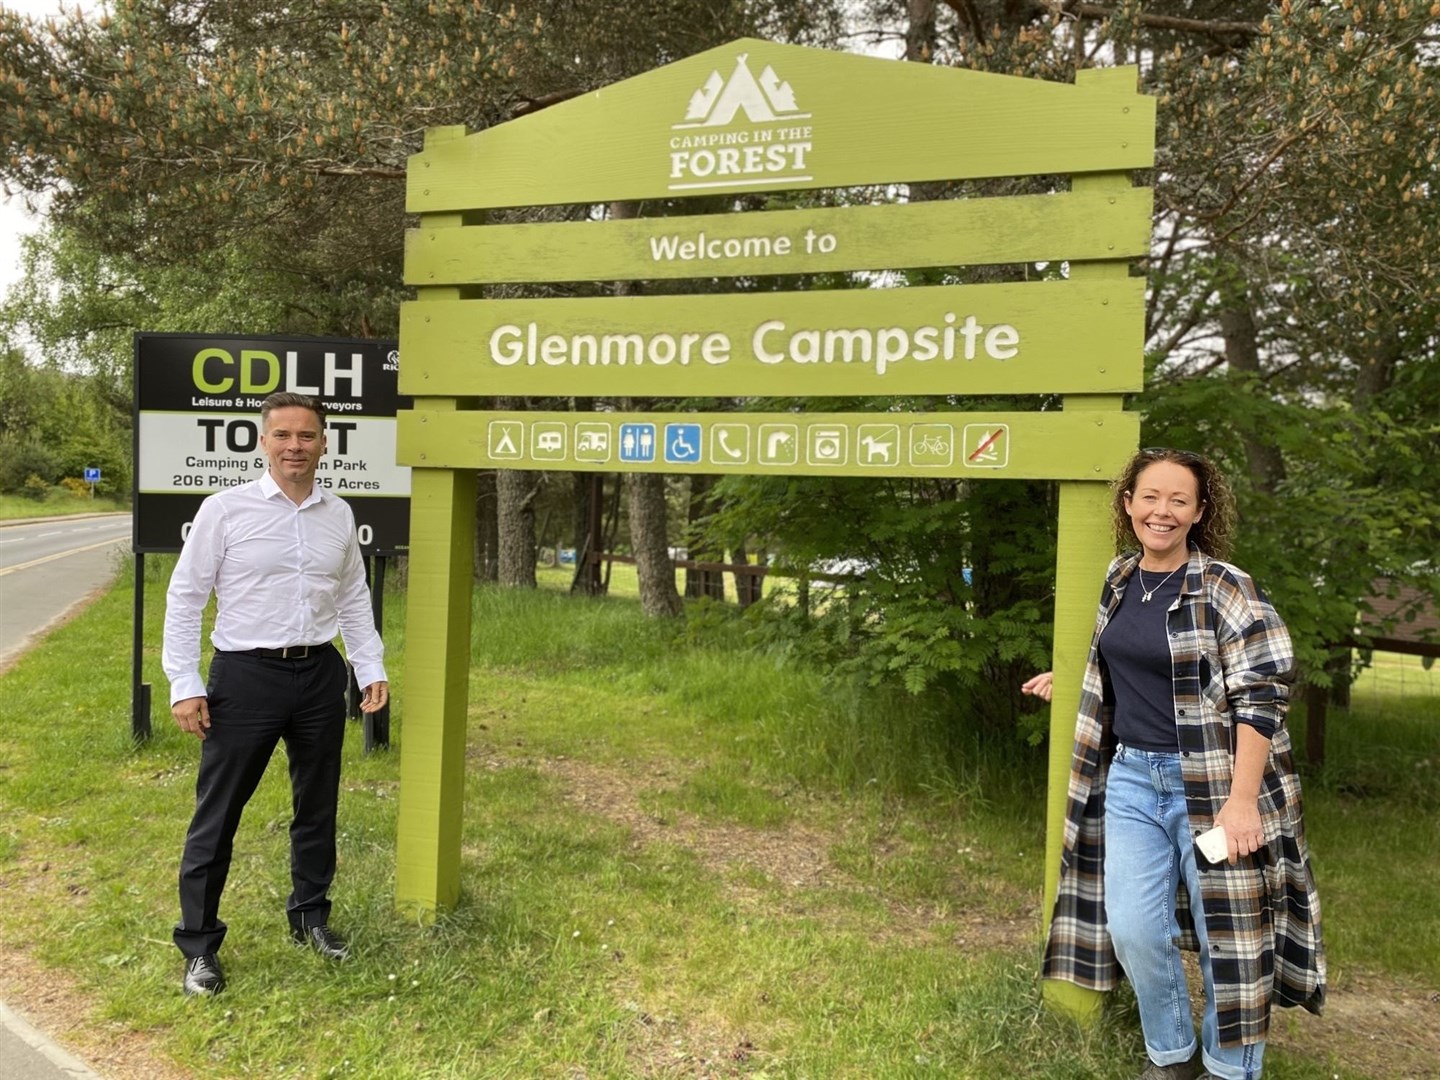 Duncan Swarbrick and fellow trust director Lee Bissett at the Glenmore campsite.